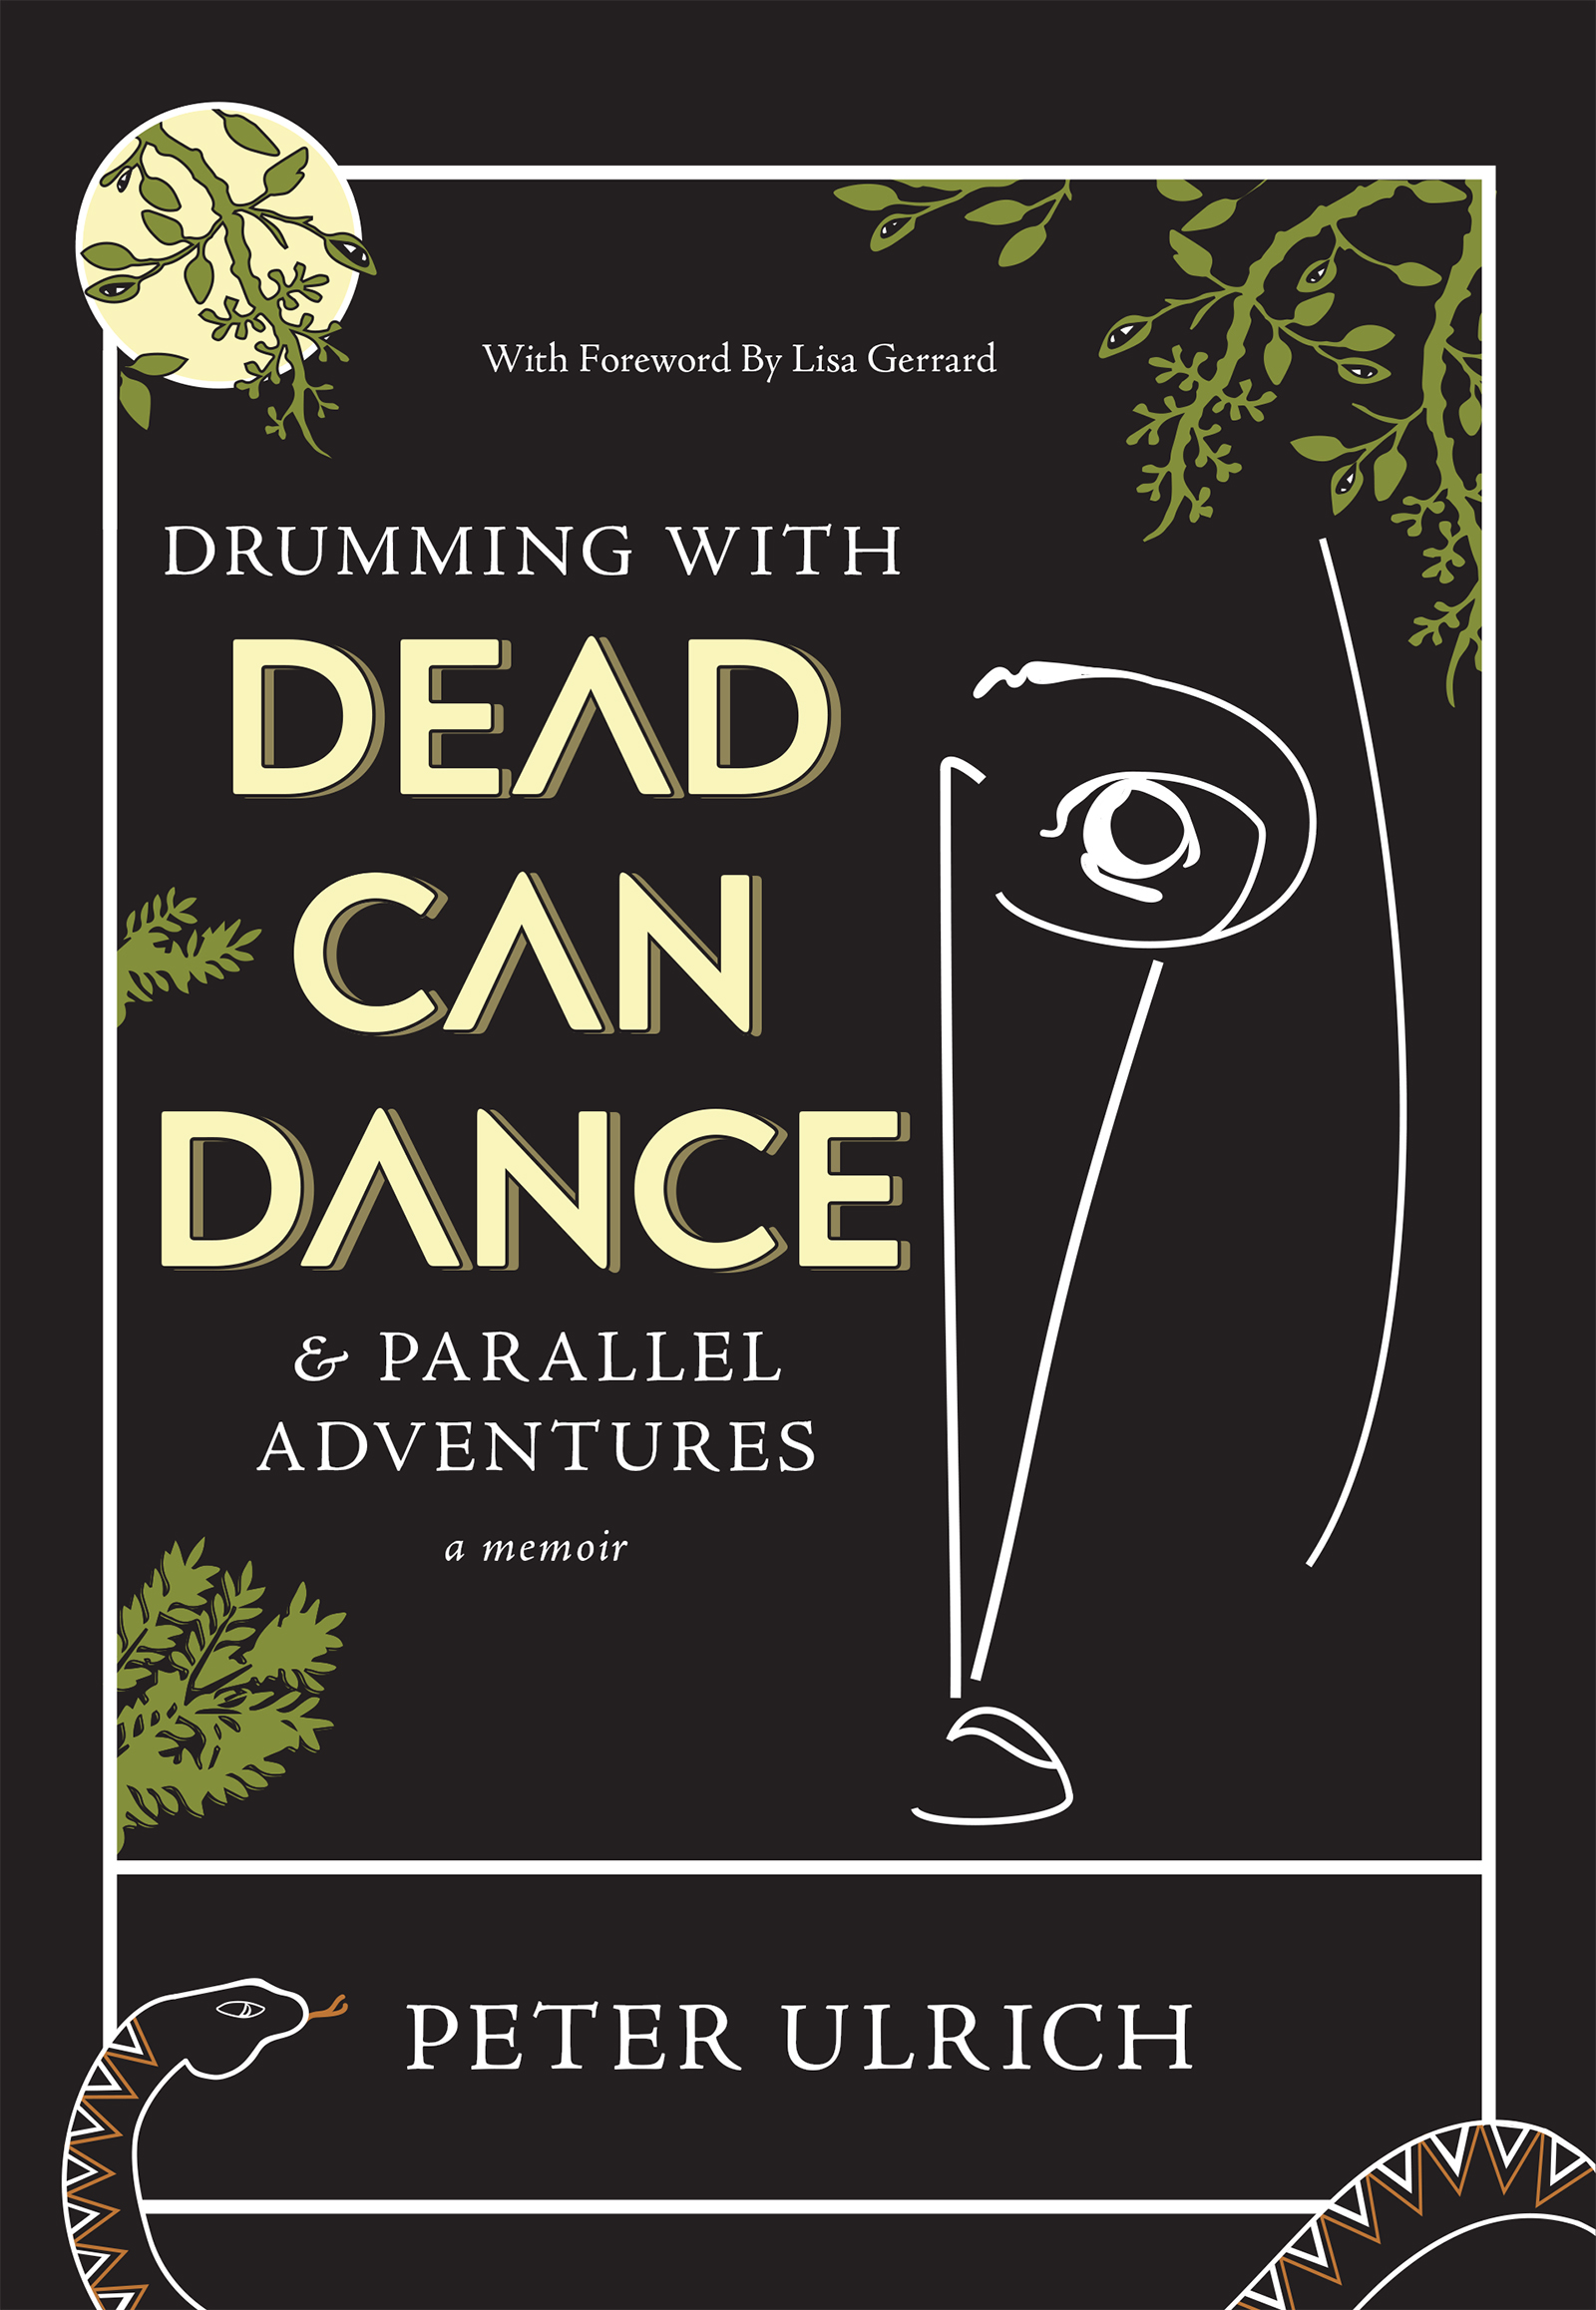 A black background with a thin white border with plant details and large yellow and white words, "Drumming with Dead Can Dance and Parallel Adventures" by Peter Ulrich.